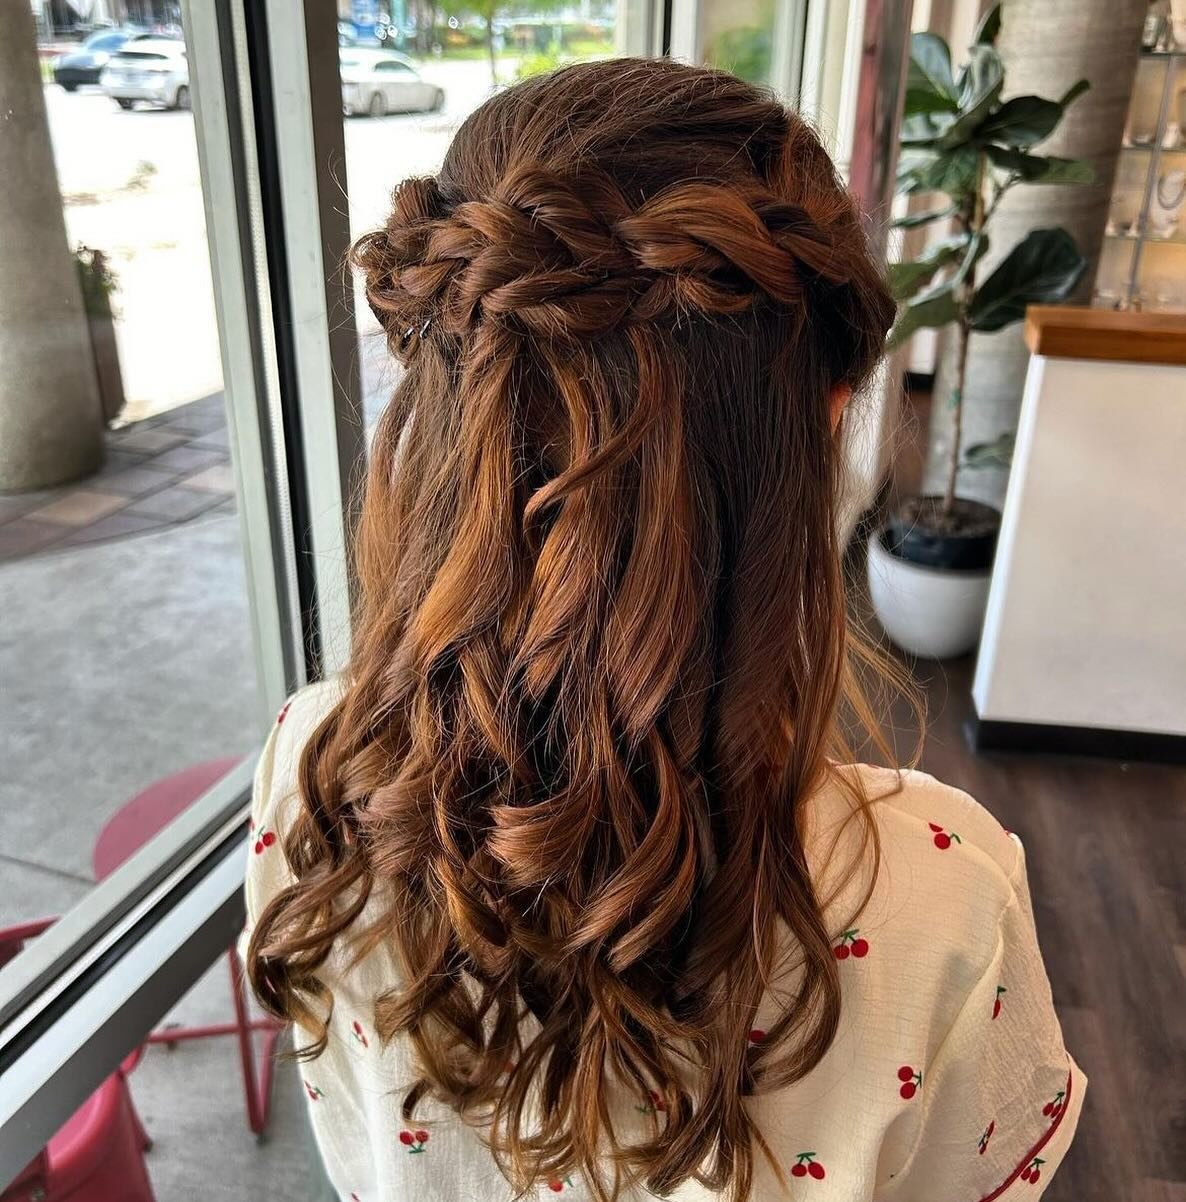 Wedding and Prom season are here! Need a styling appointment? Call us today! Updo: @beautybylemmon